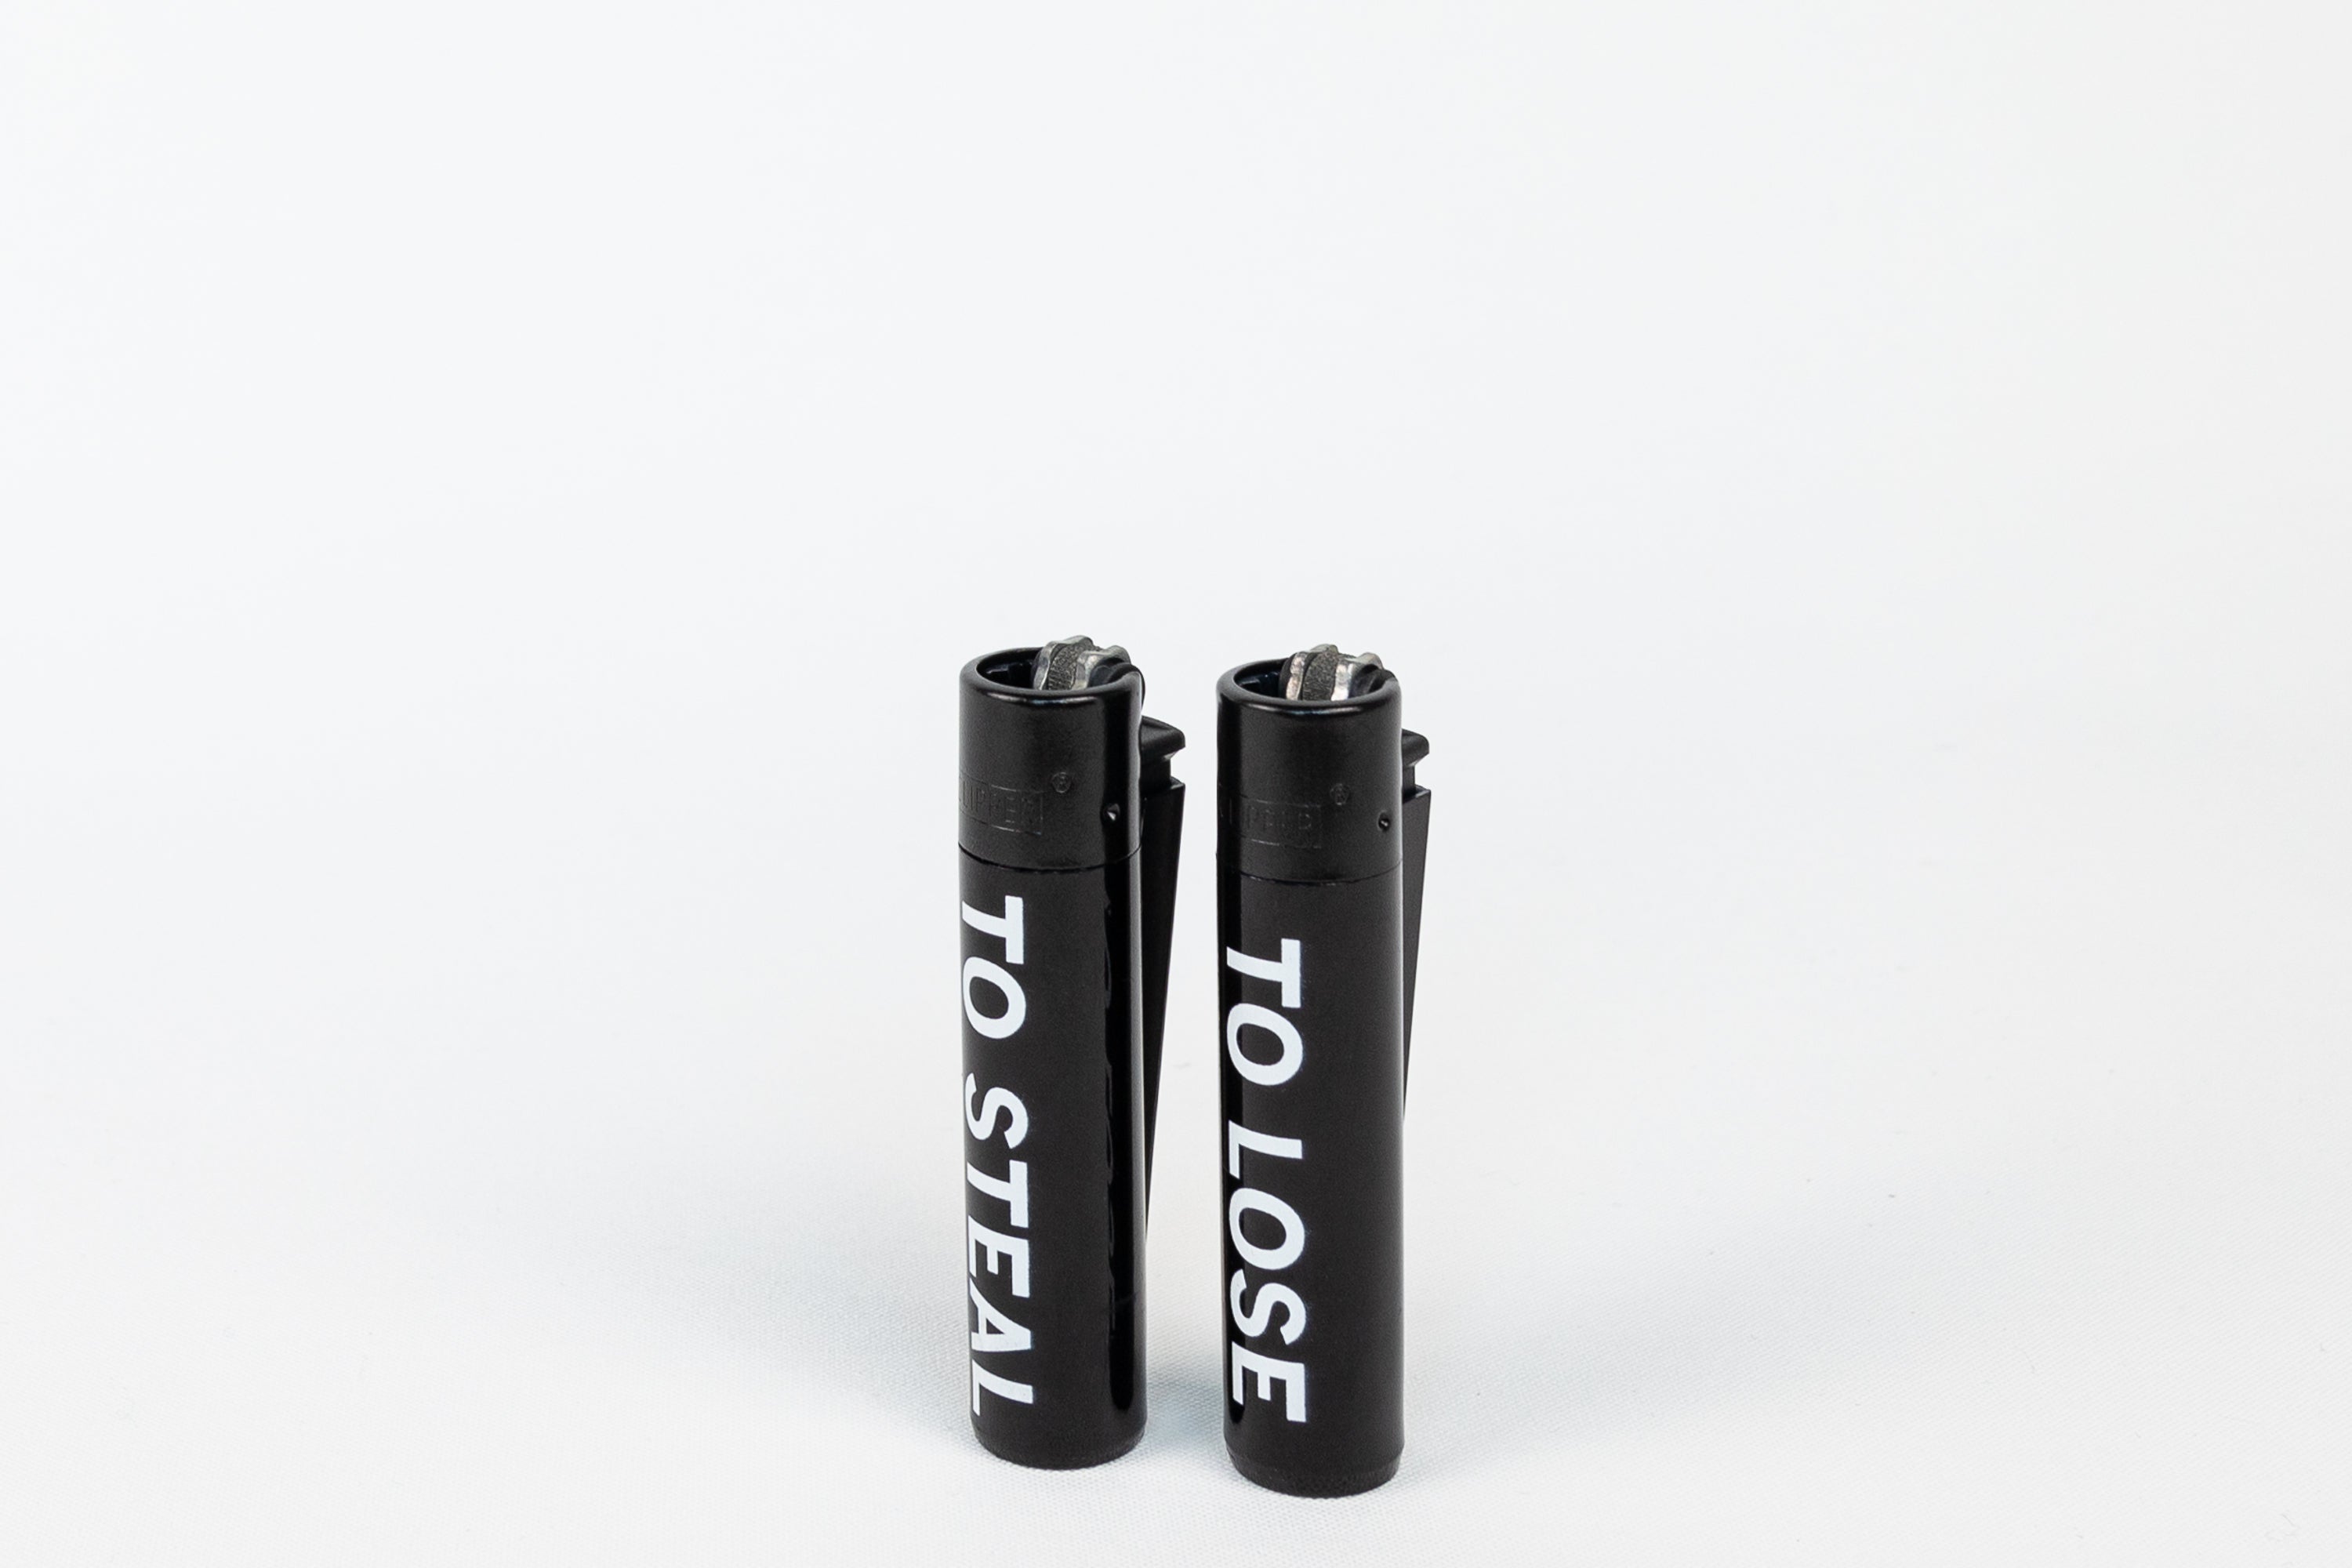 To Lose To Steal - Set of Lighters